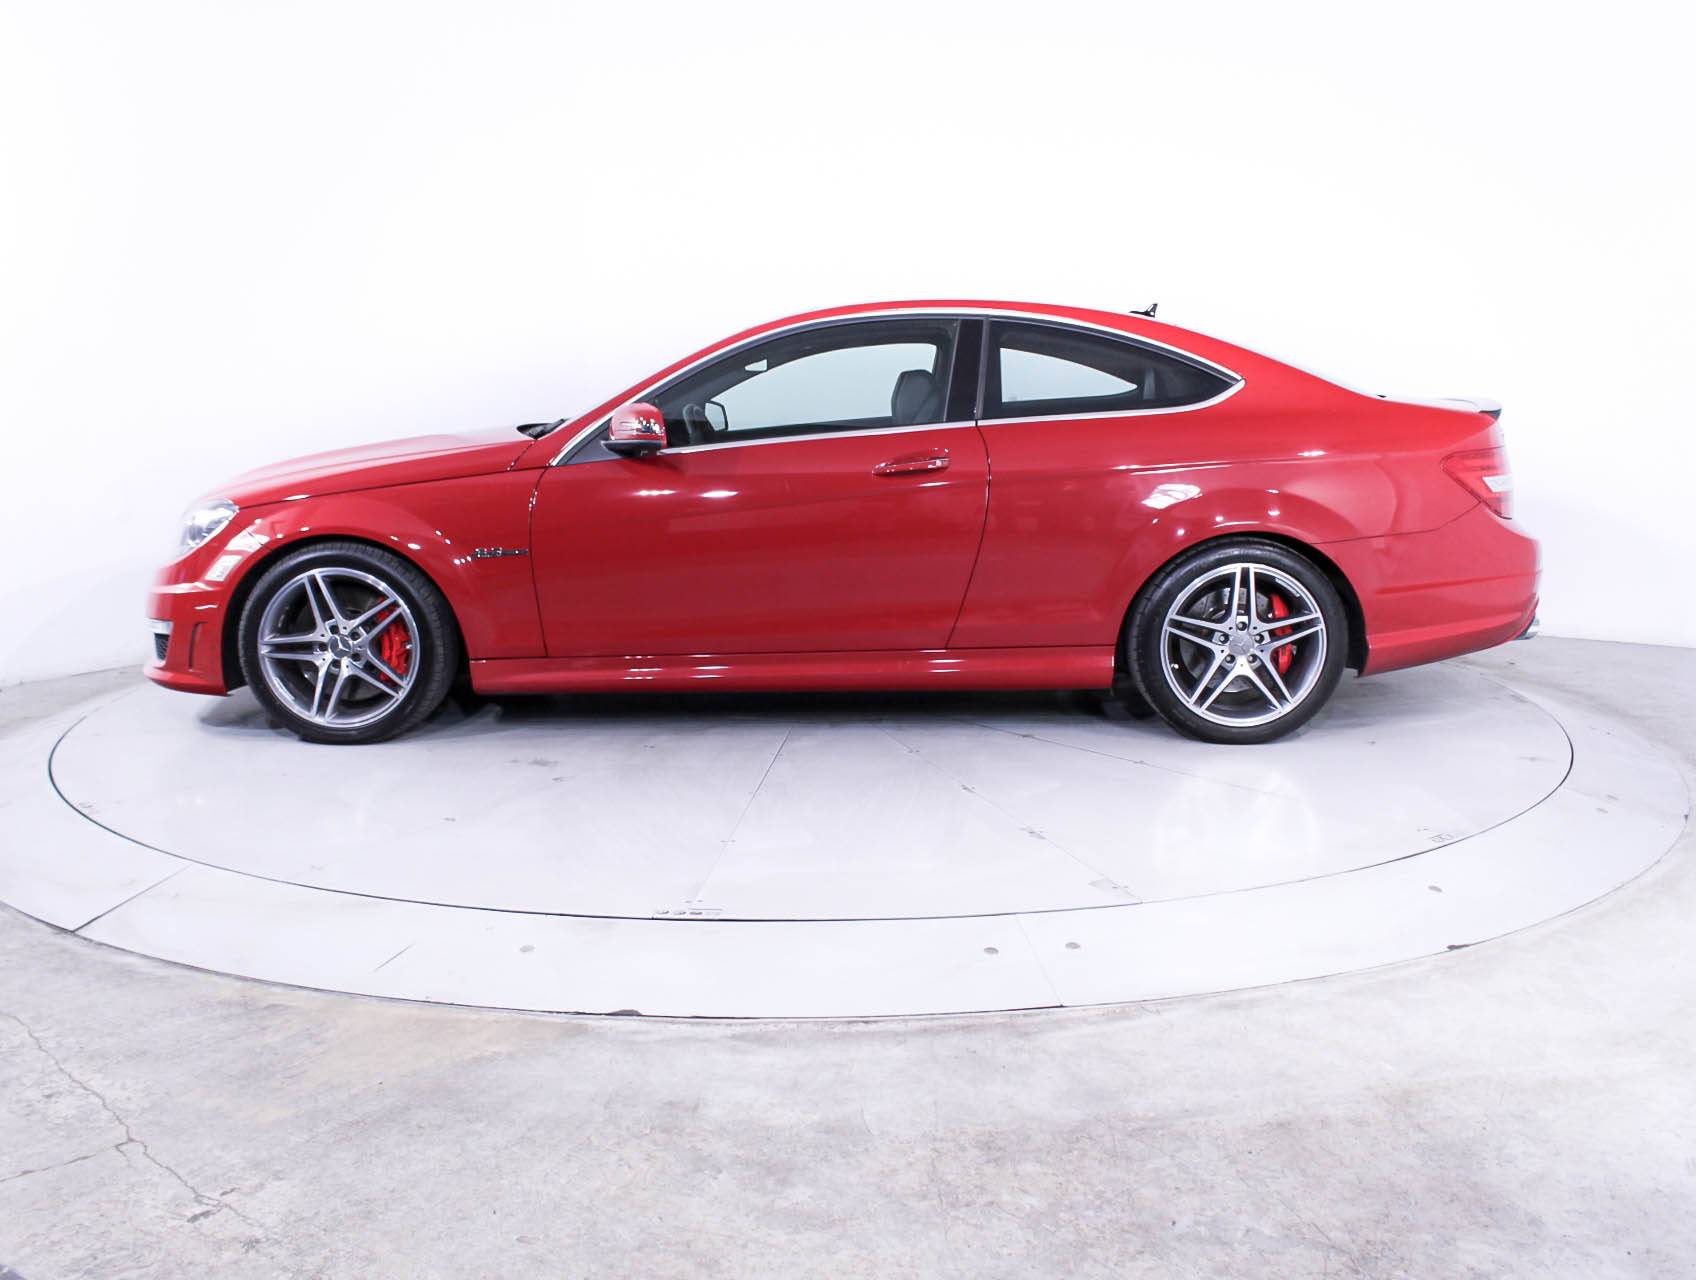 Used 13 Mercedes Benz C Class C63 Amg Coupe For Sale In Miami Fl 042 Florida Fine Cars